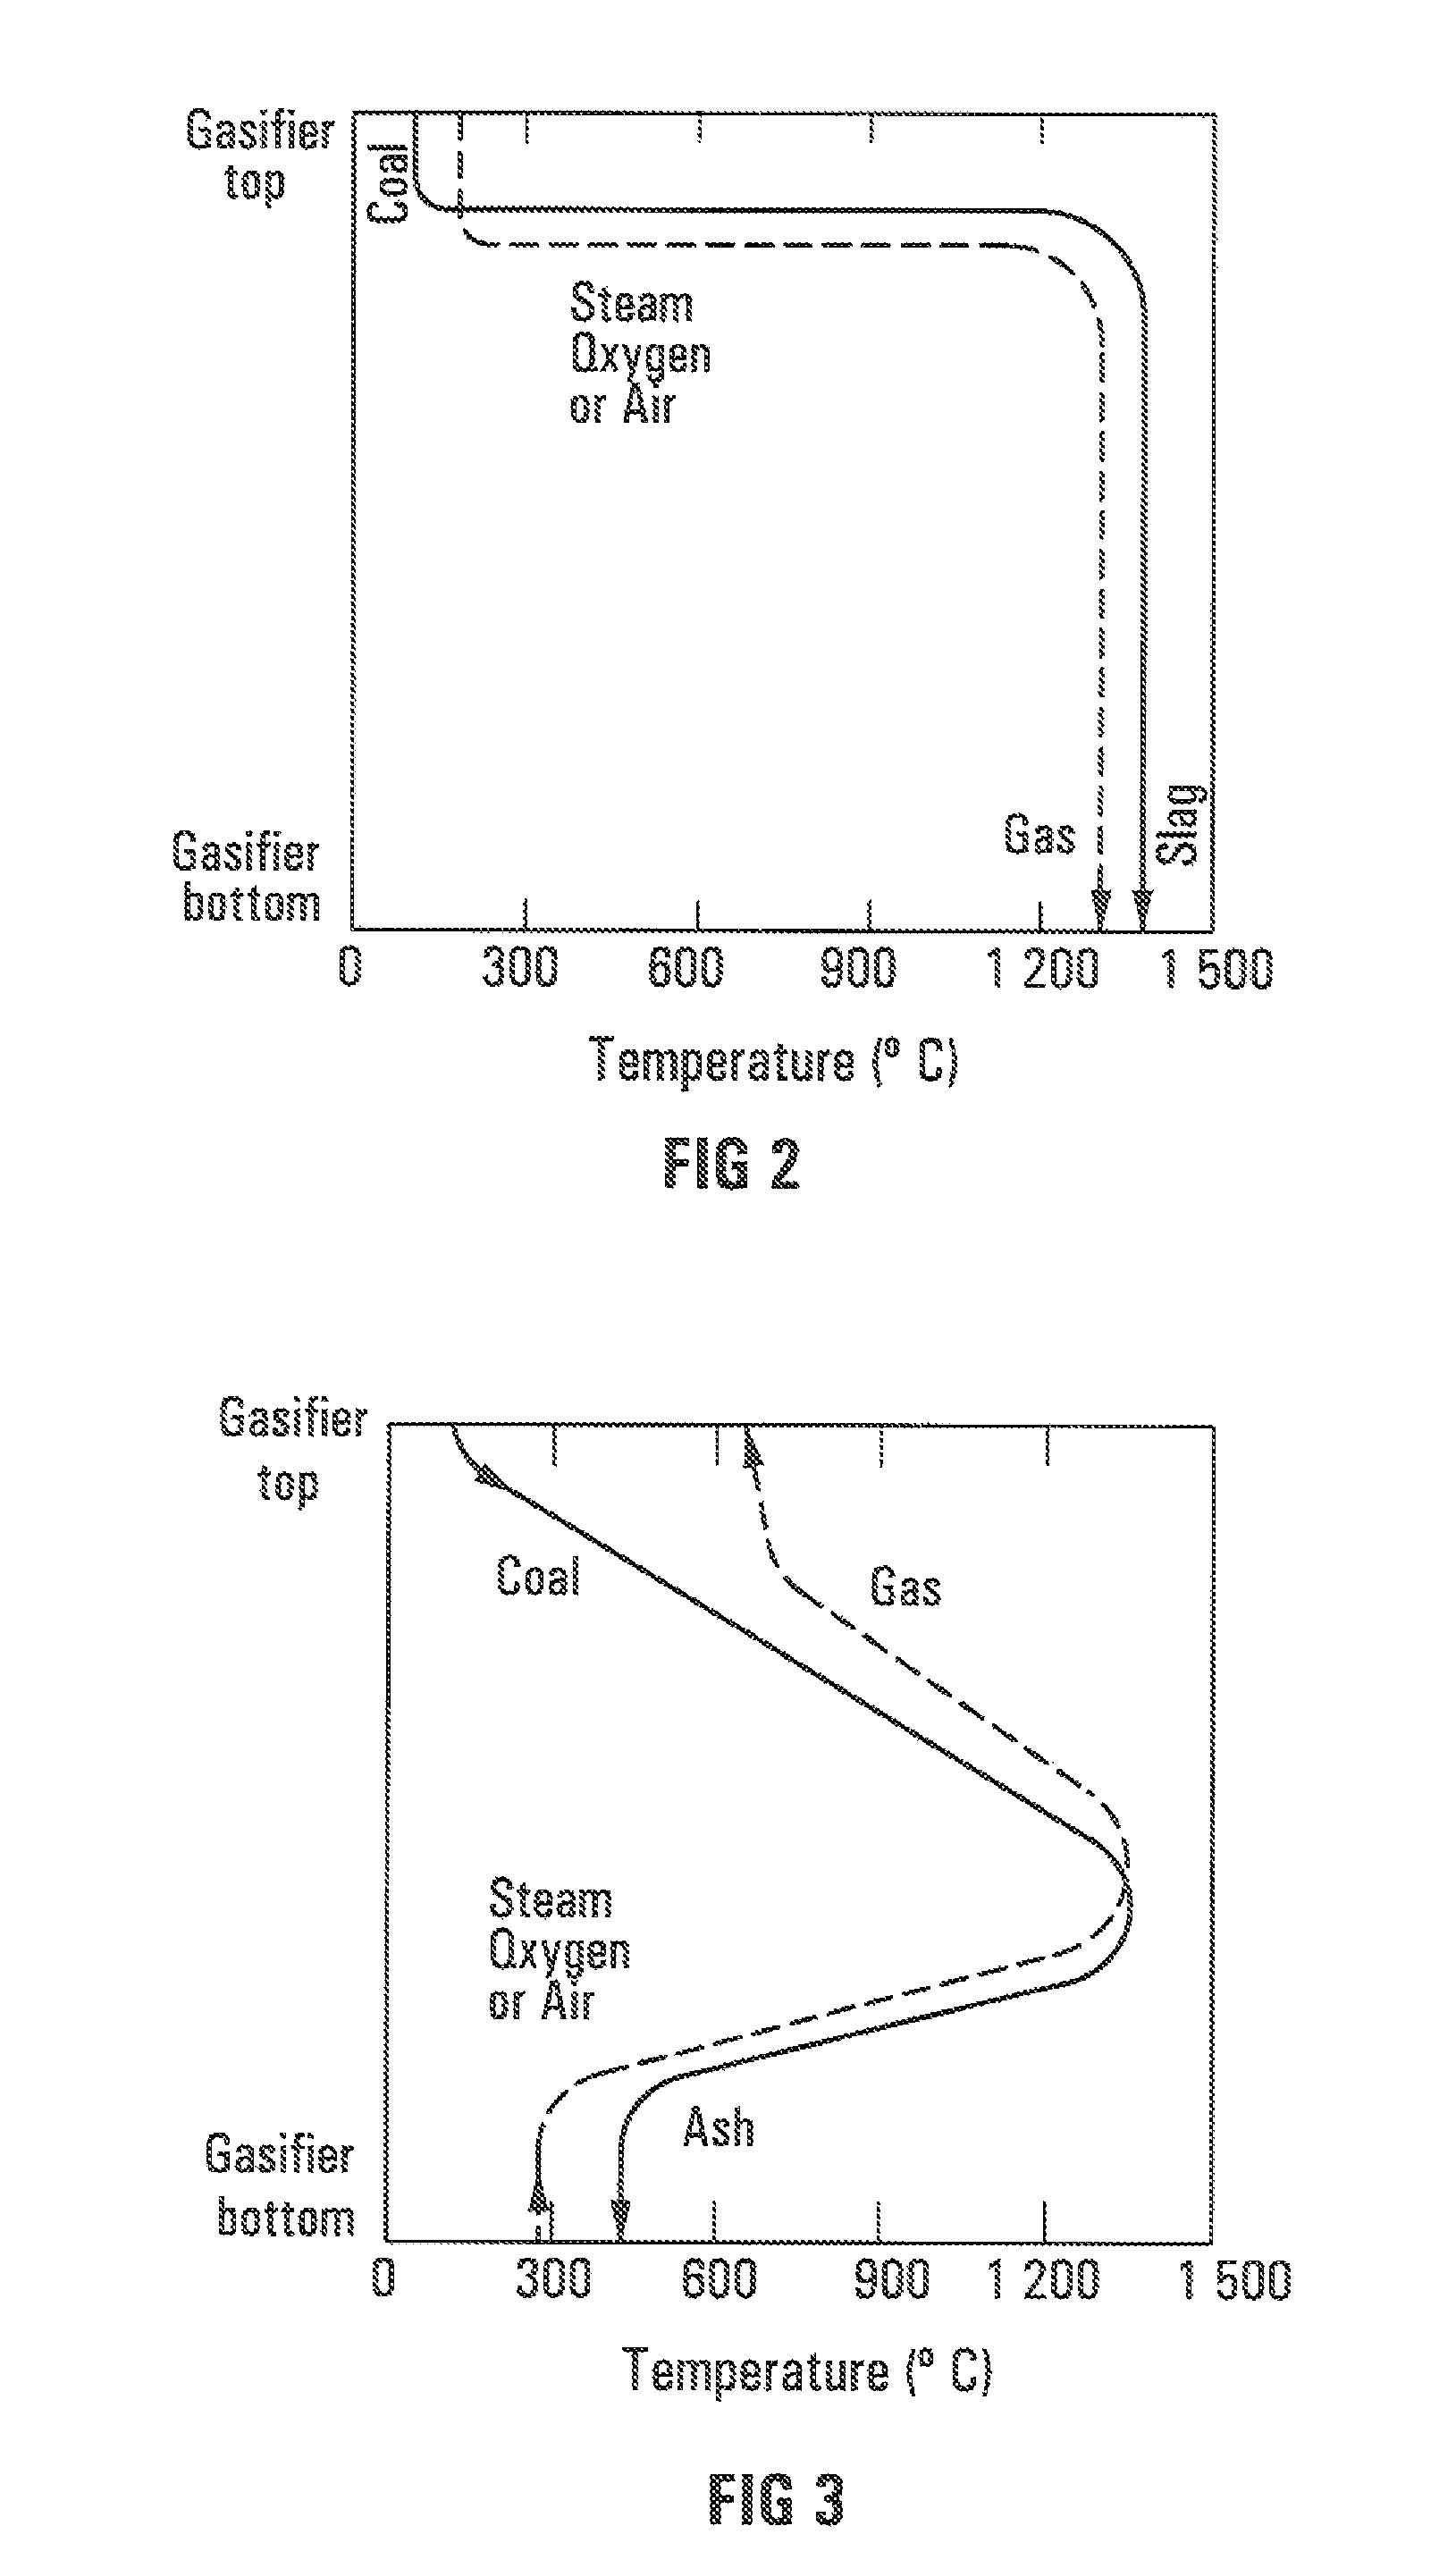 Coal processing operation comprising a dense media separation stage to separate a coal feedstock into lower and higher ash coal streams